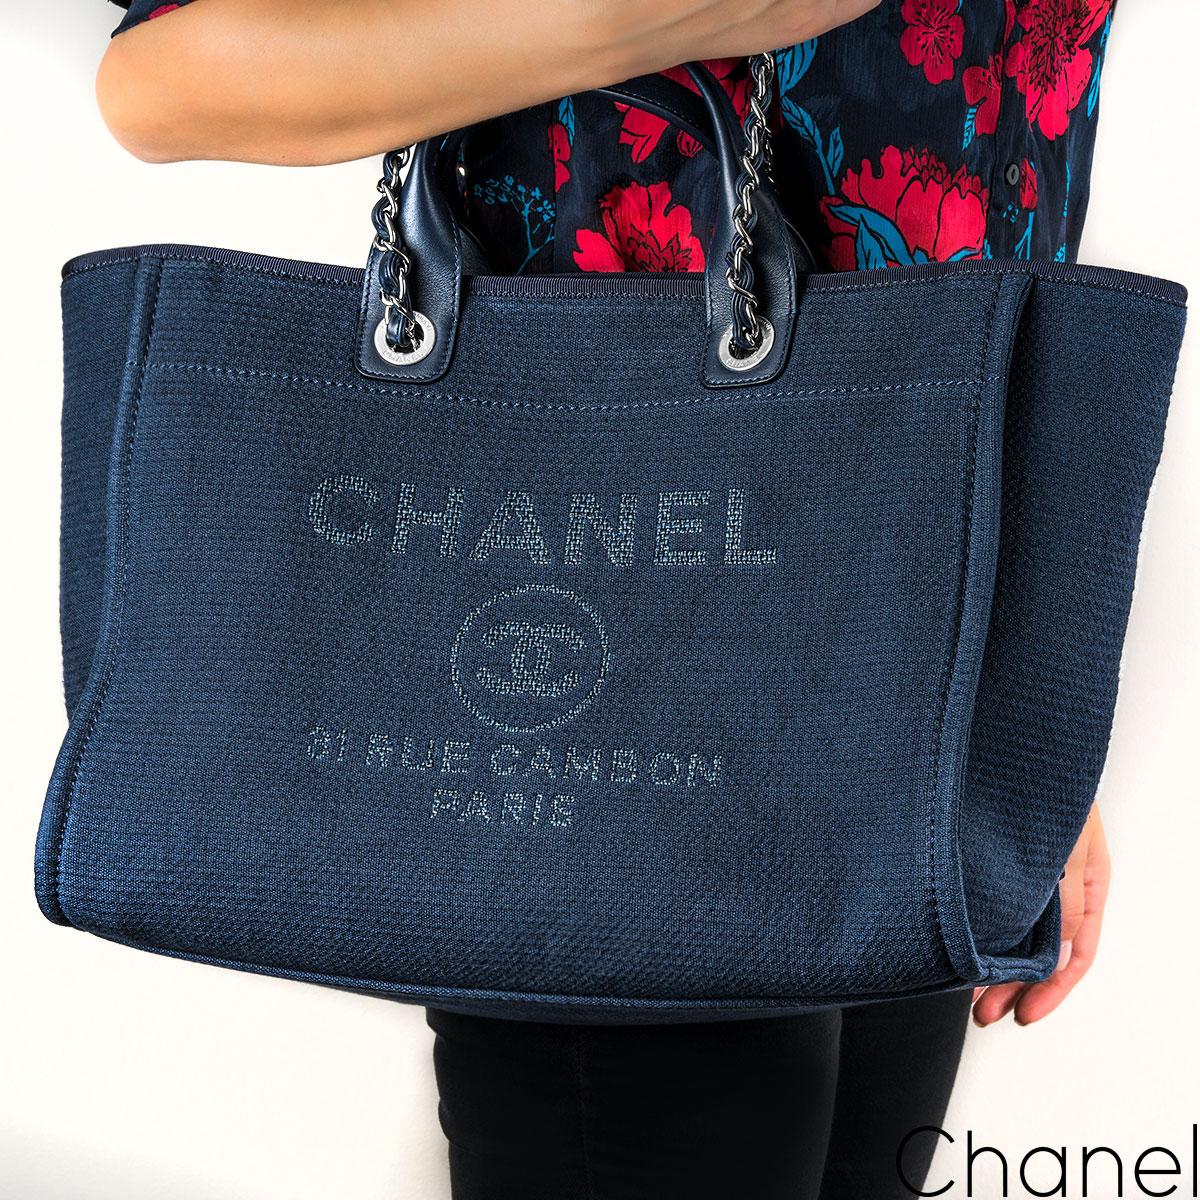 Chanel Blue Deauville Grand Shopping Tote Bag For Sale 1